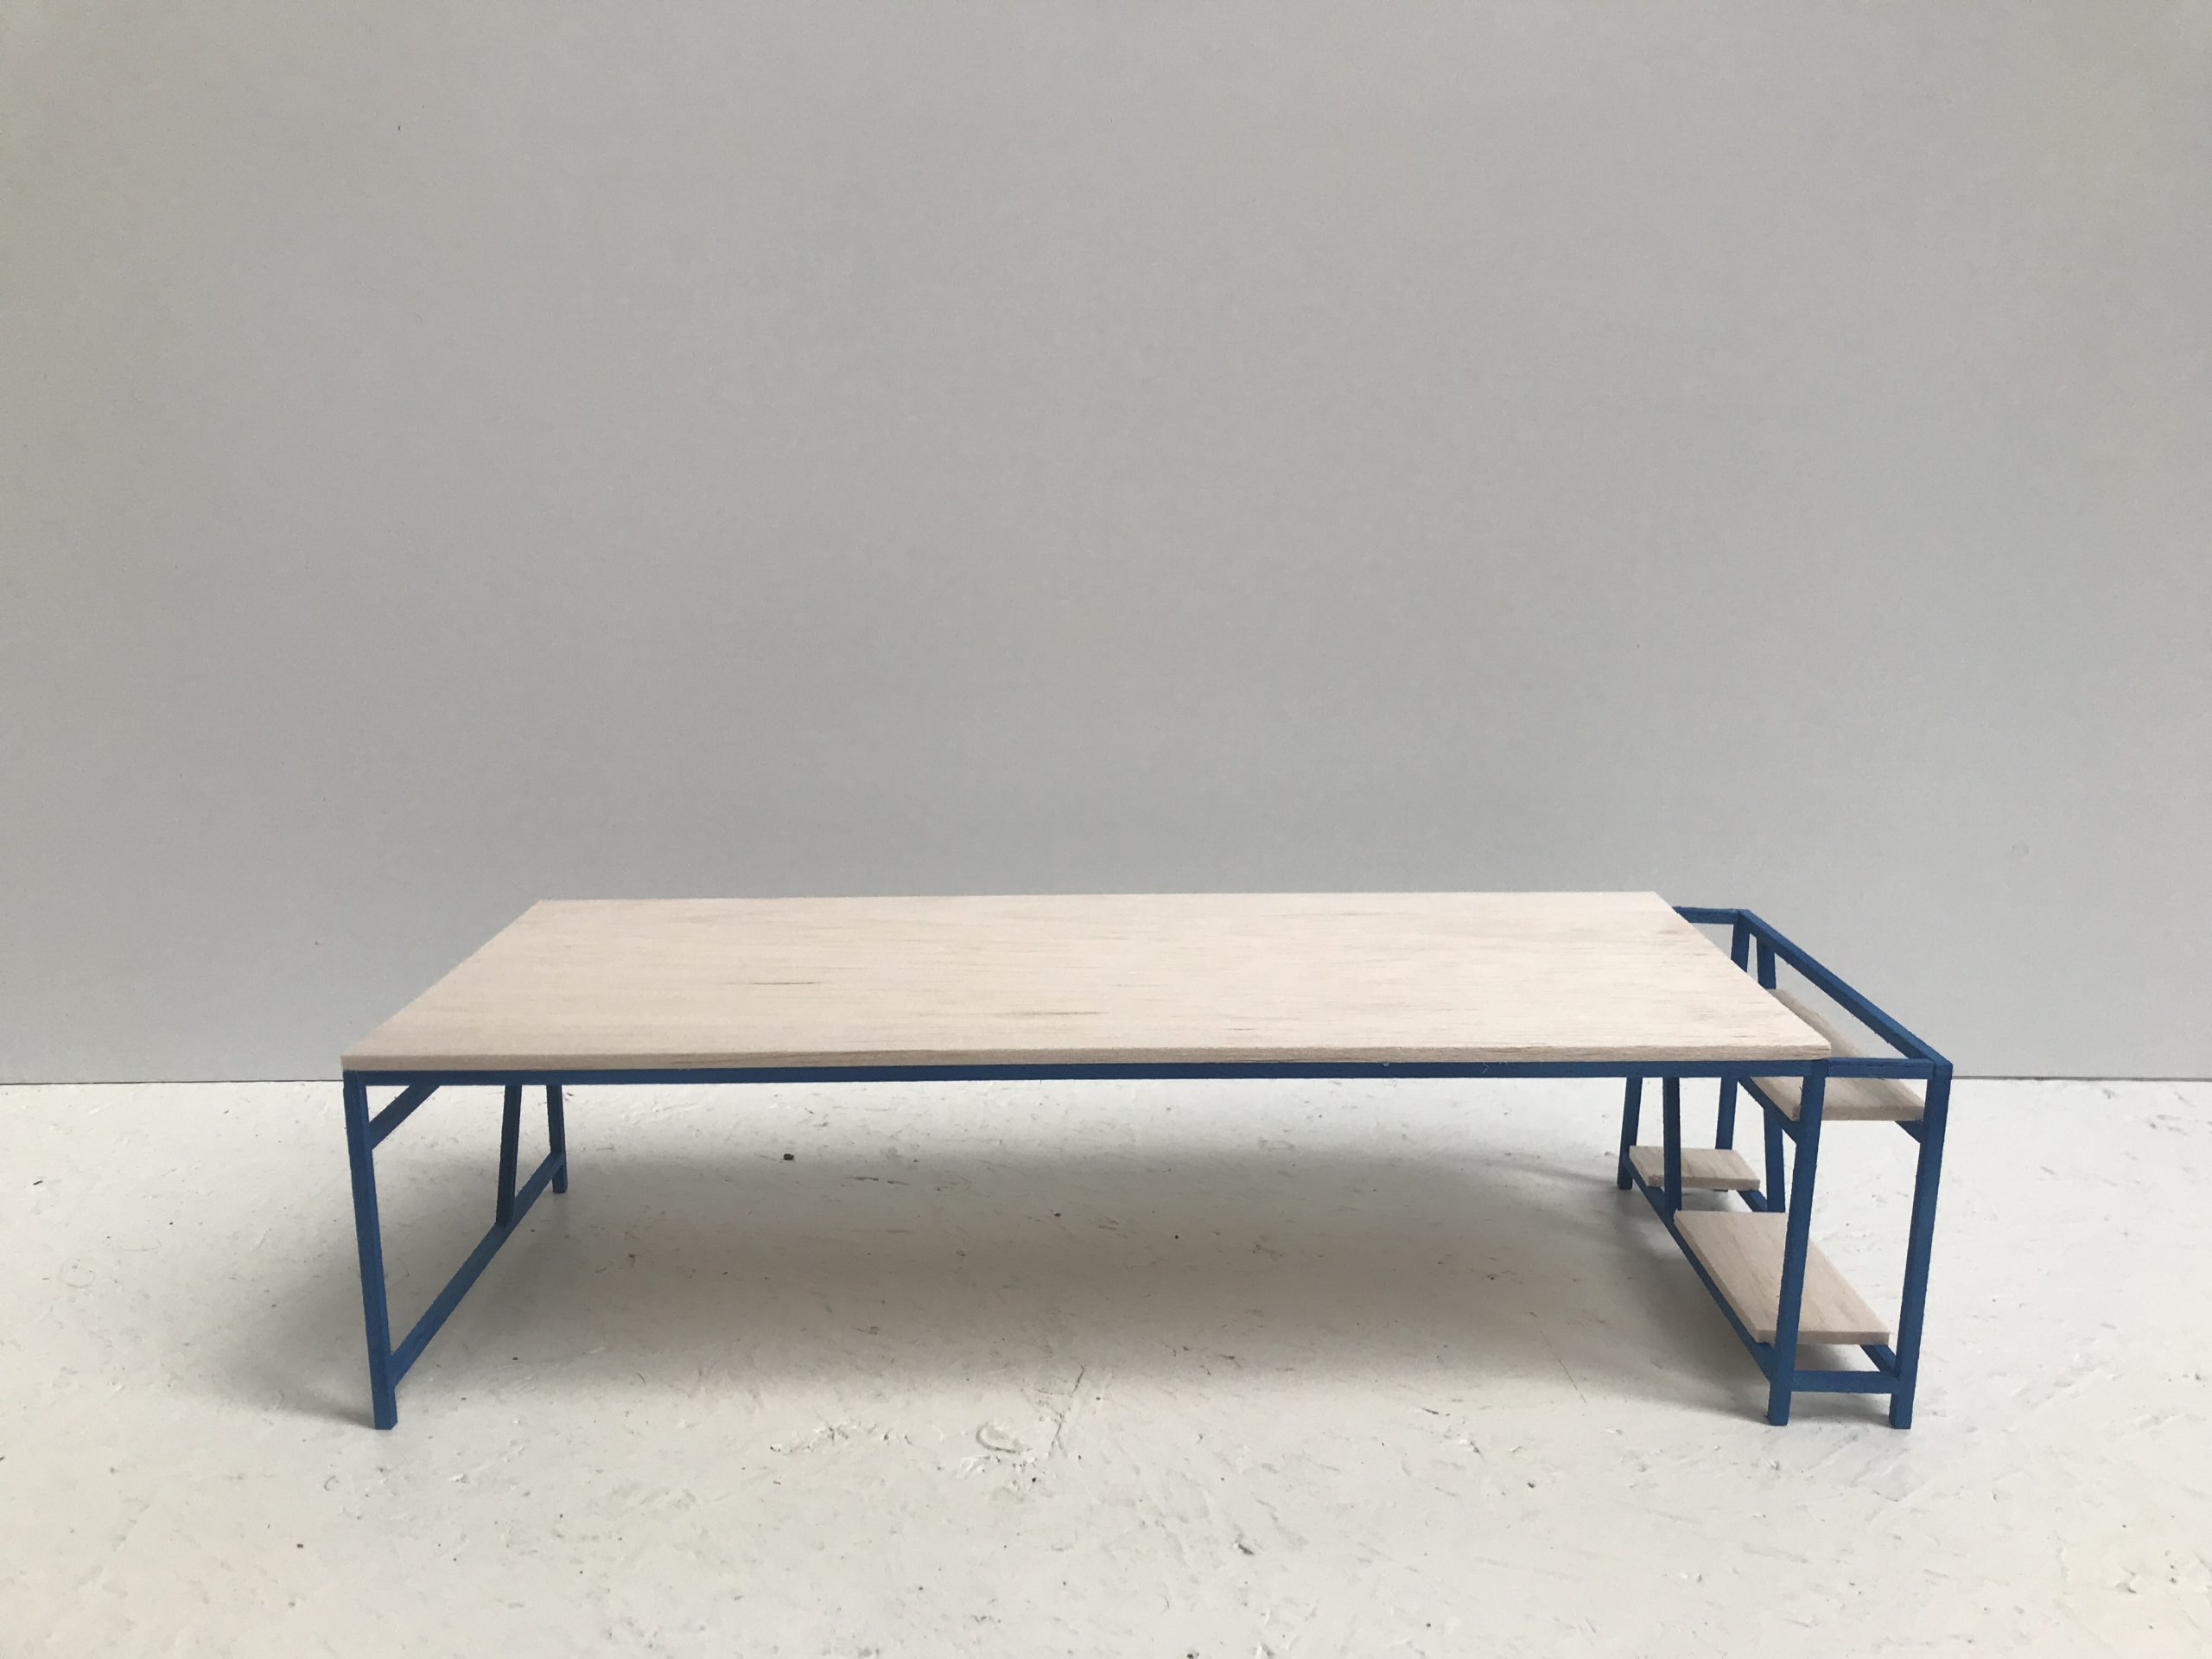 Tangents meeting table scale model